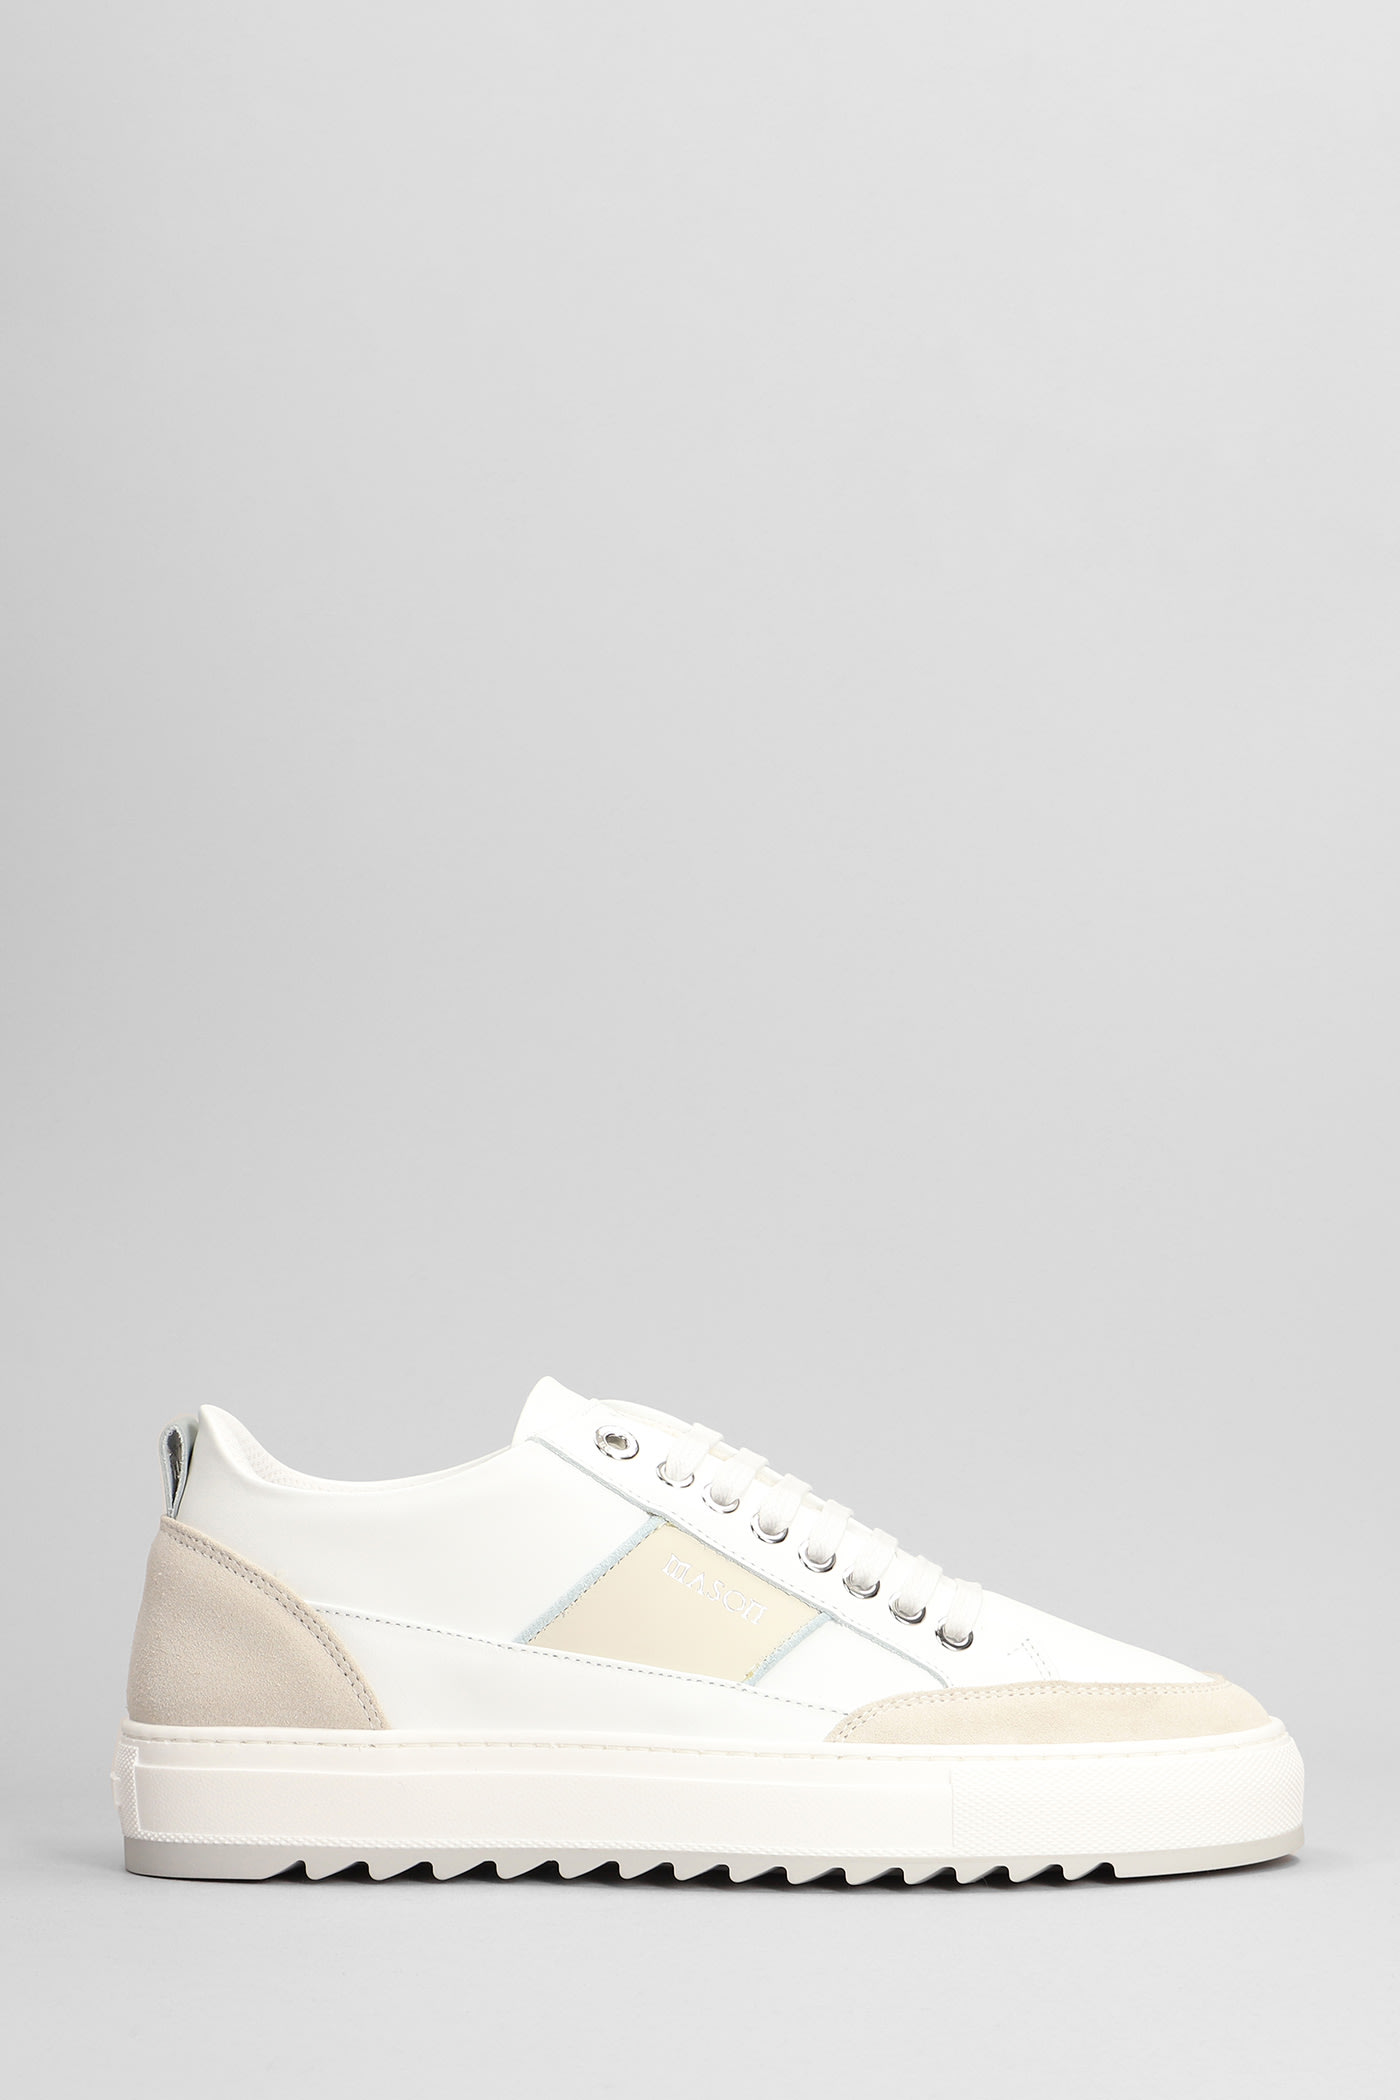 Tia Sneakers In White Suede And Leather